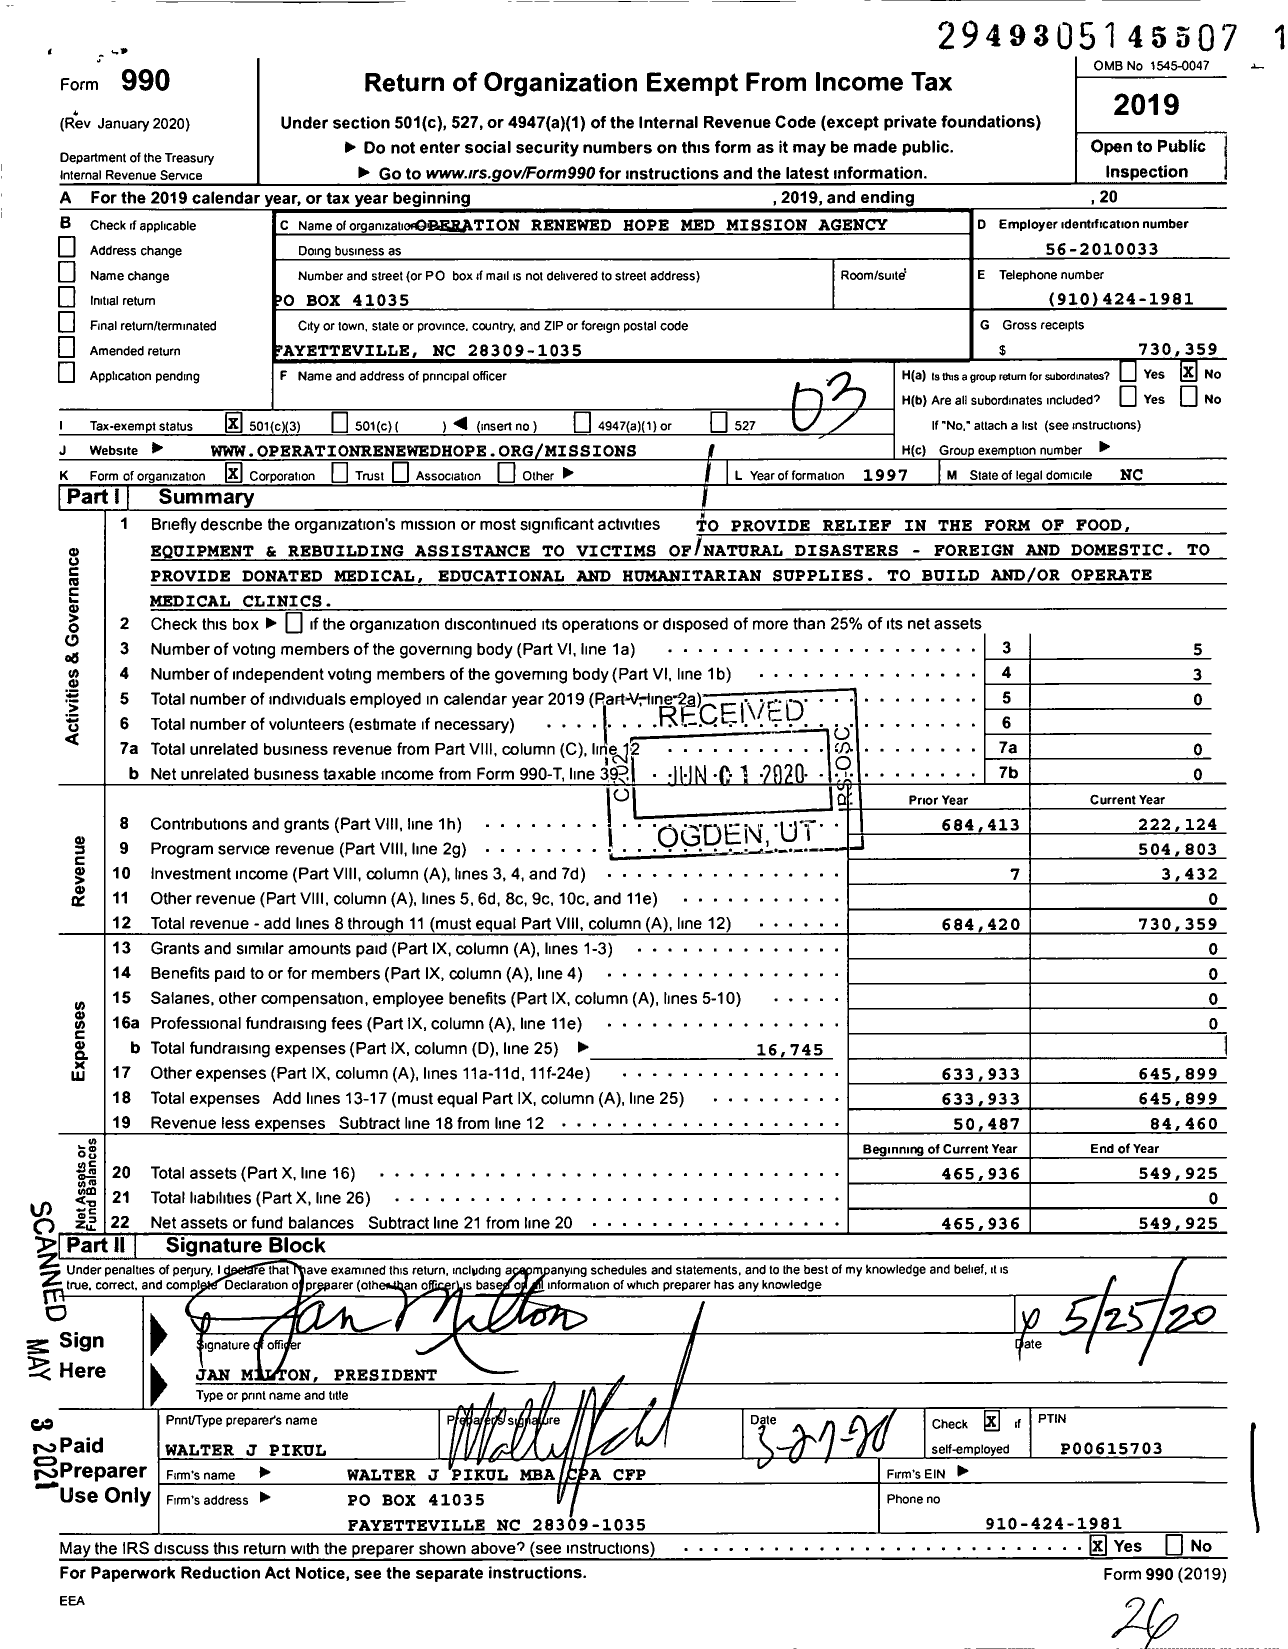 Image of first page of 2019 Form 990 for Operation Renewed Hope Med Mission Agency